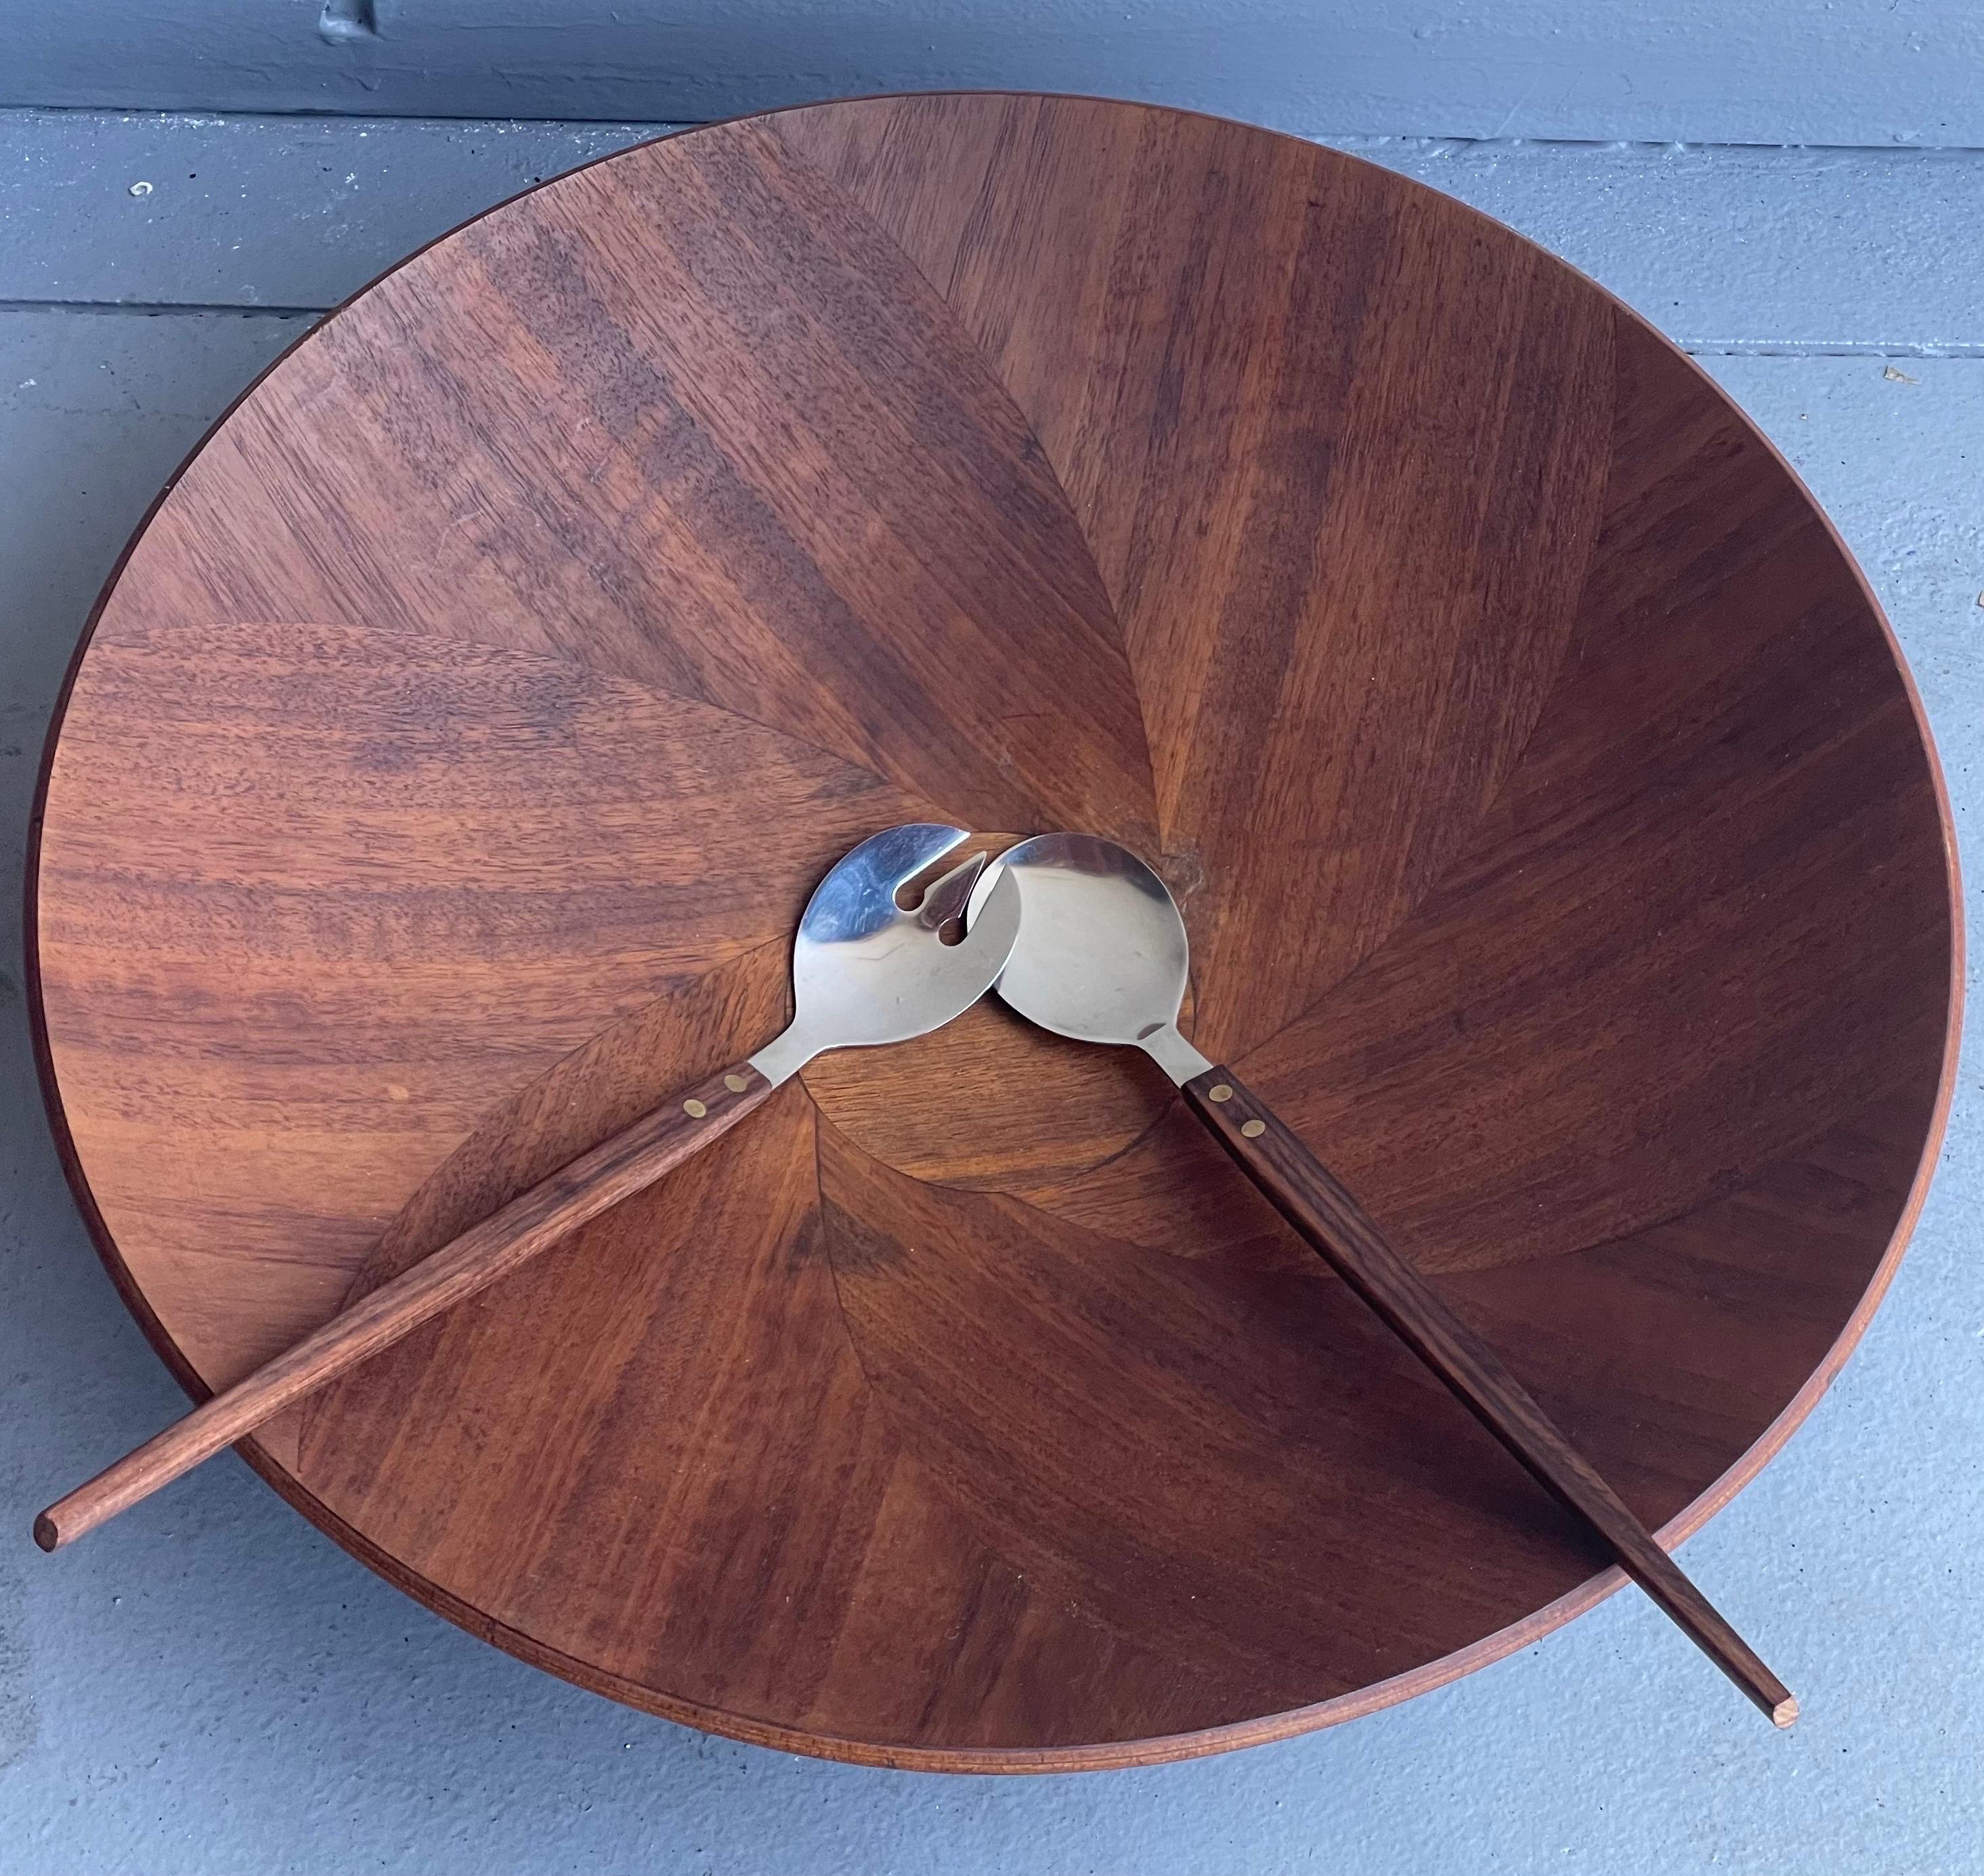 Beautiful large inlaid walnut salad bowl by Gladmark of California, circa 1960s. The bowl is in very good vintage condition and measures 18